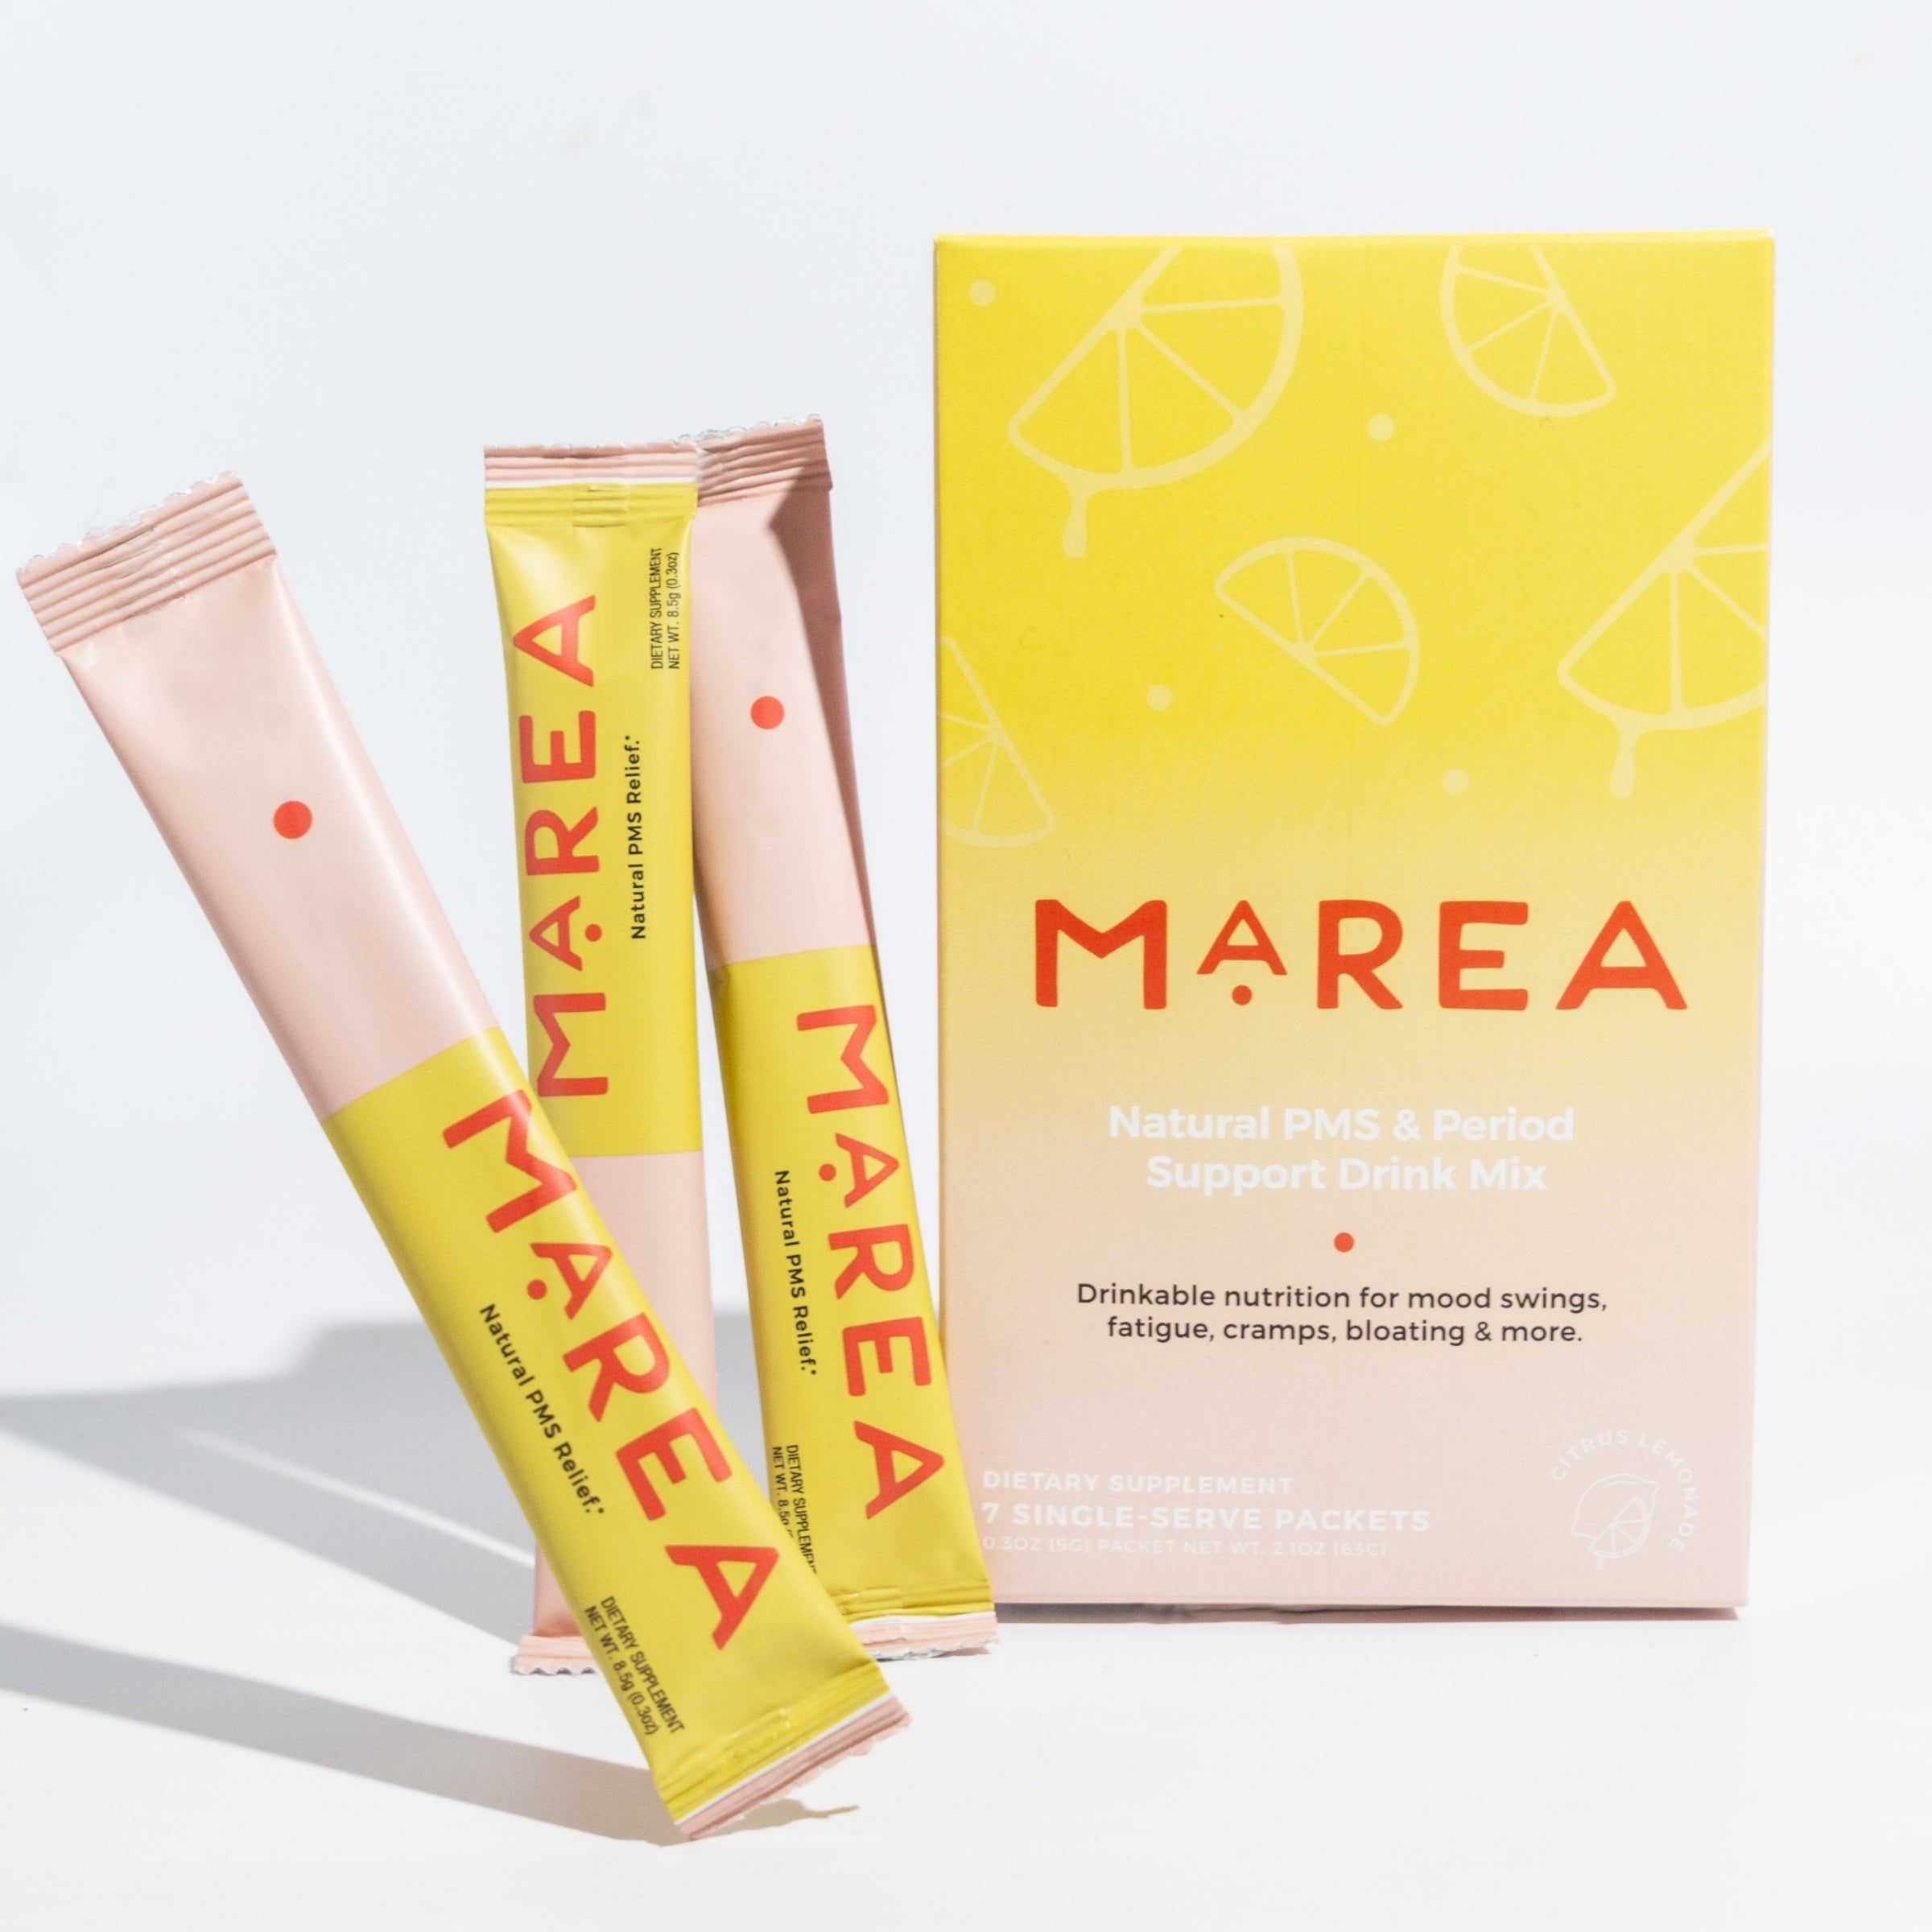 Marea Period Support Drink Mix